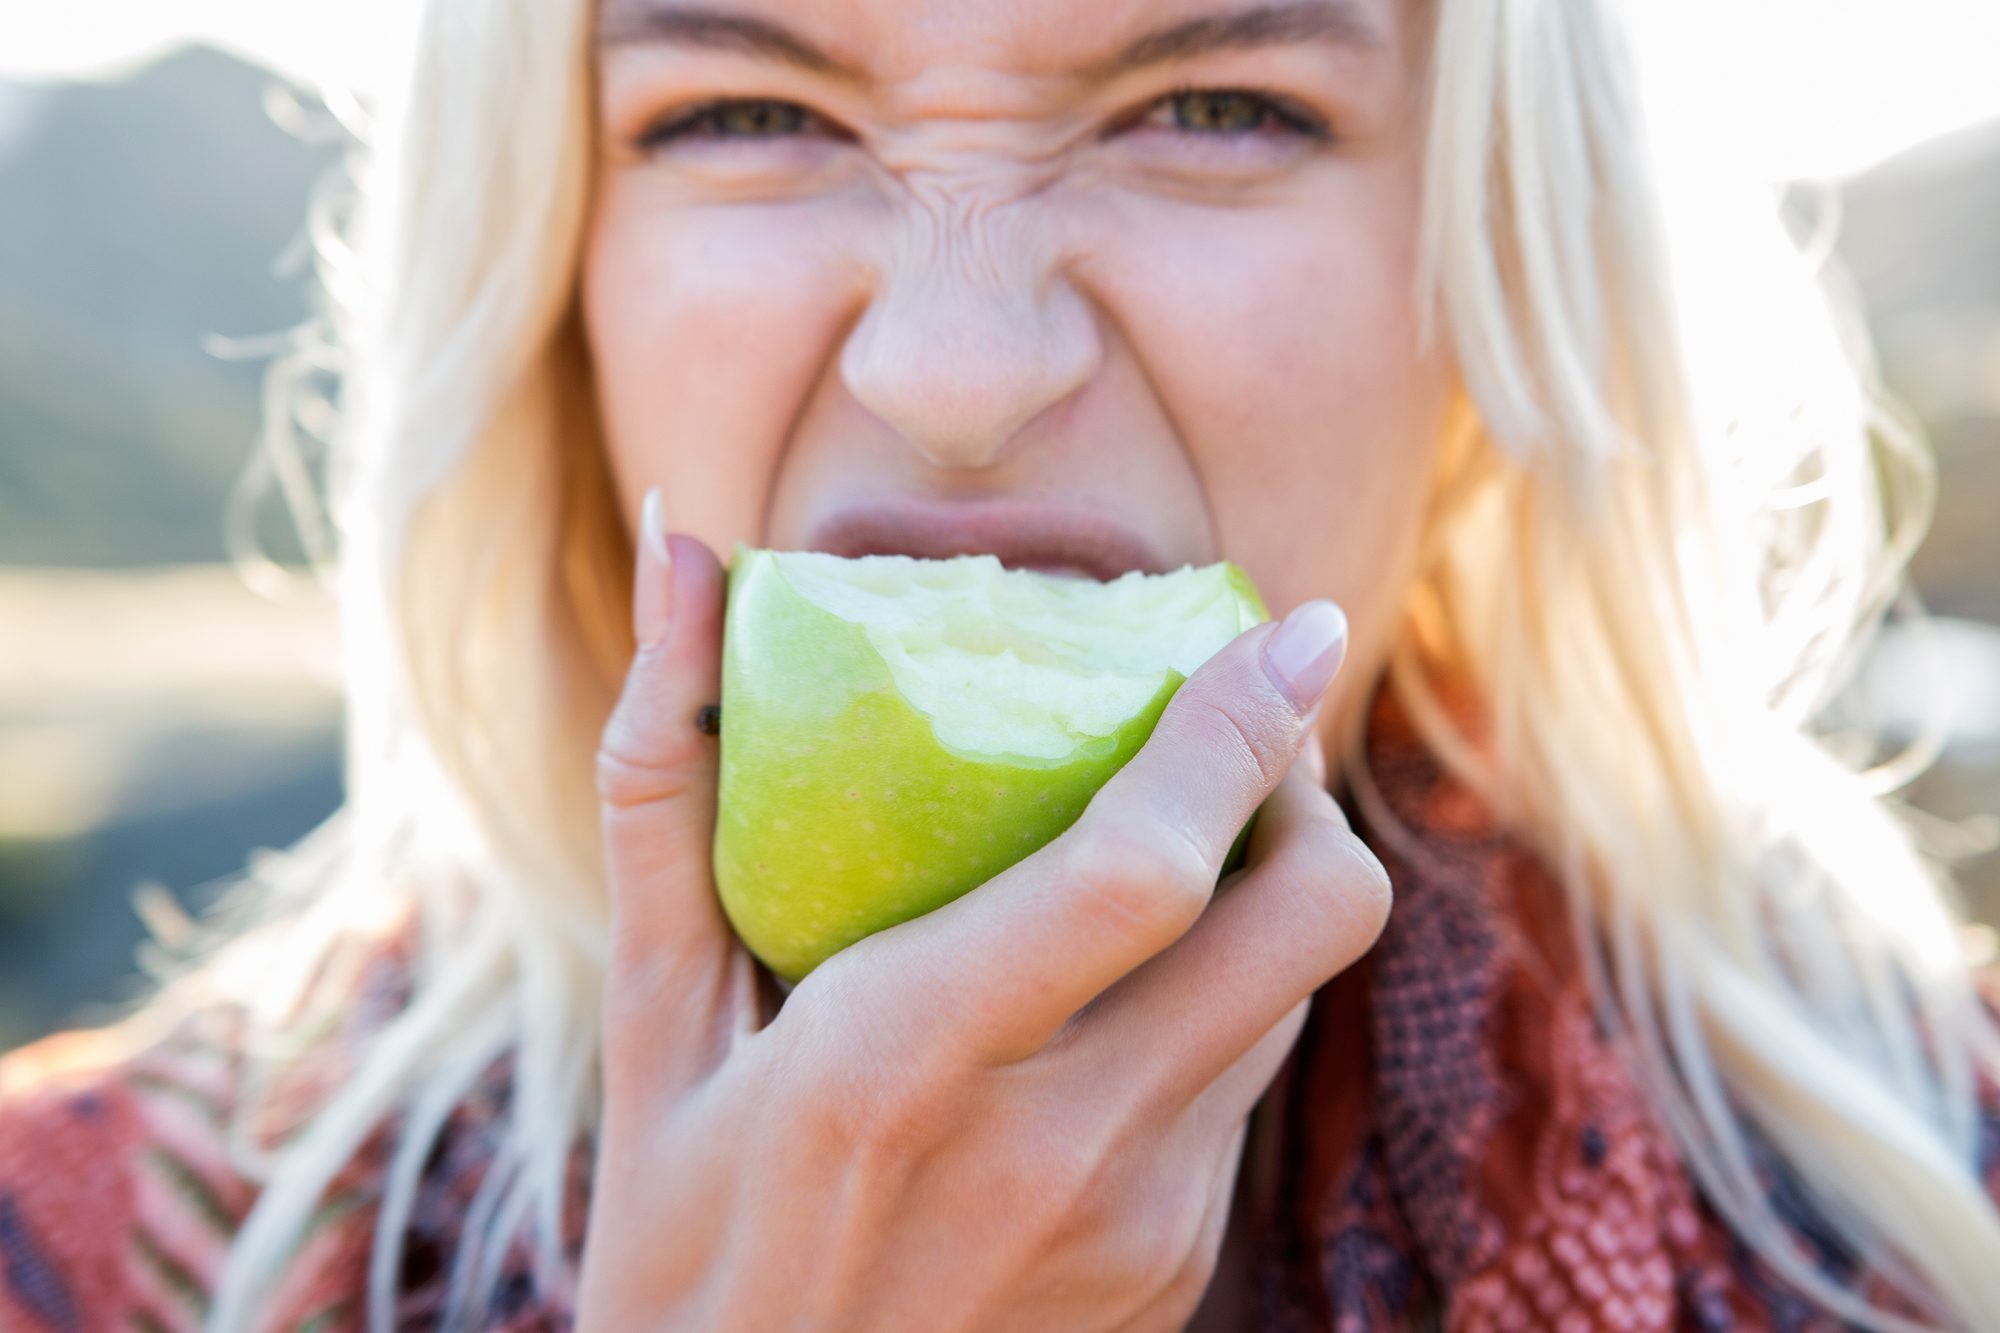 Does Noisy Eating and Loud Gum Chewing Drive You Crazy? You May Have Misophonia